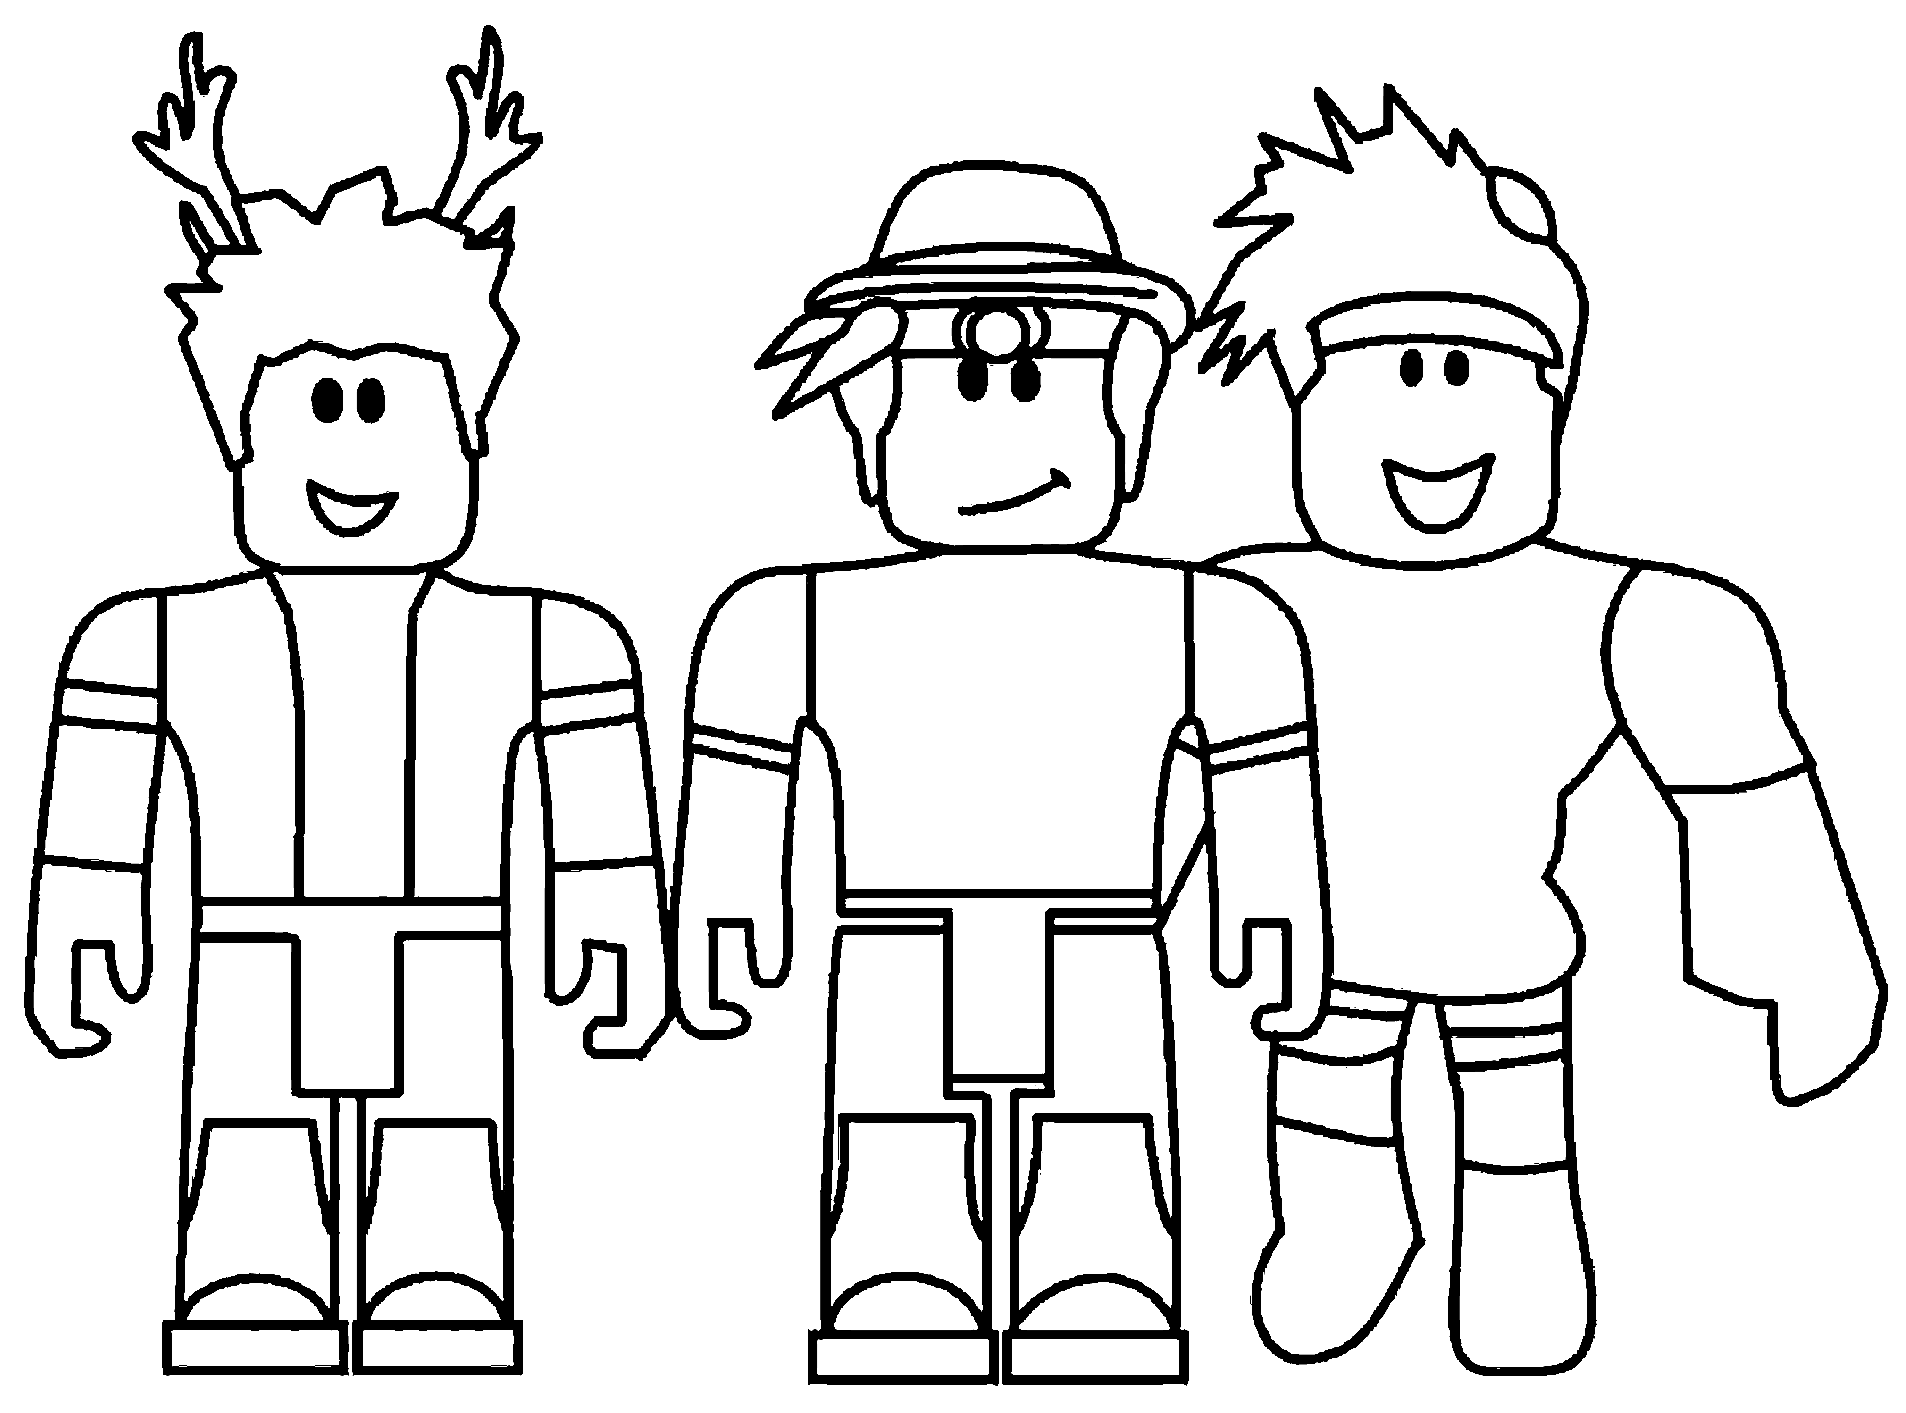 Personnages Roblox souriants Coloriage